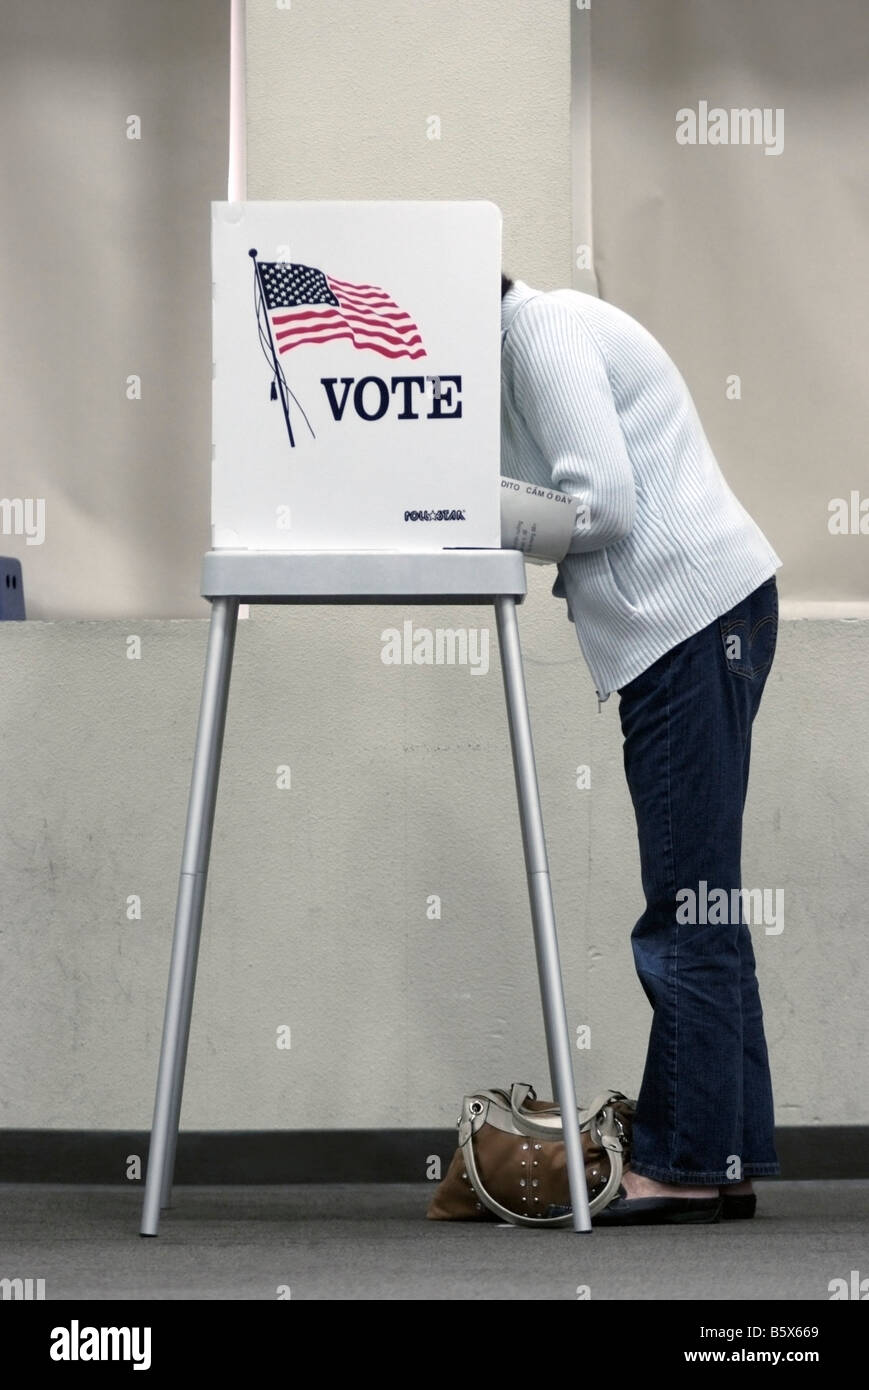 Elderly woman marking her ballot at a Polling Place in San Jose, CA, on November 4, during the 2008 U.S. Presidential election. Stock Photo